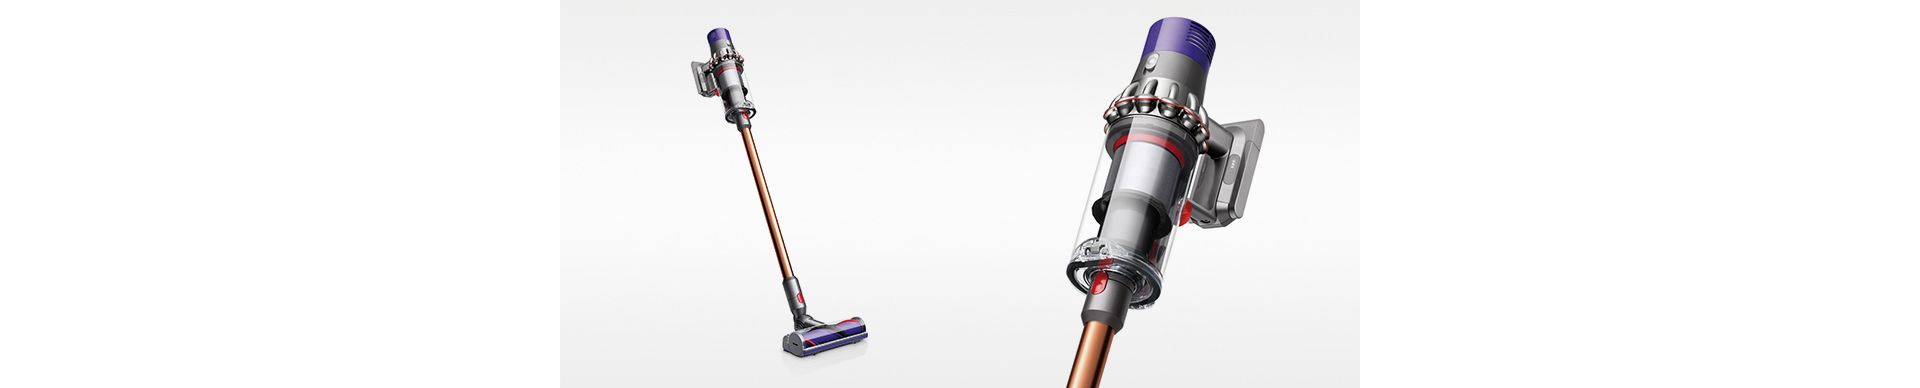 Image showing Dyson V10 Absolute